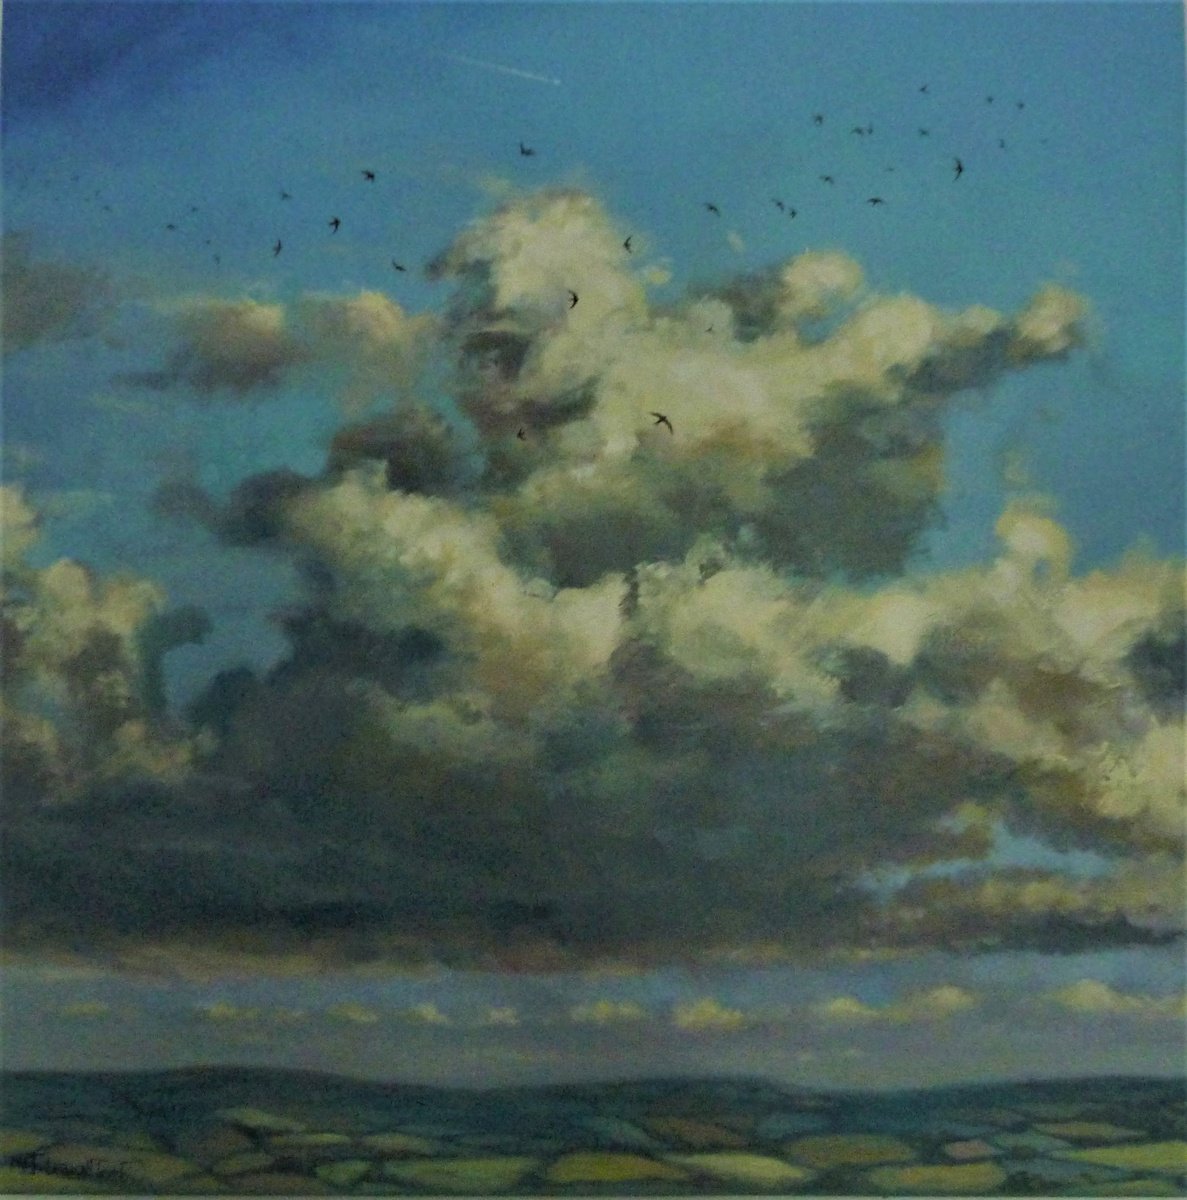 Billowing Clouds by Martin J Leighton